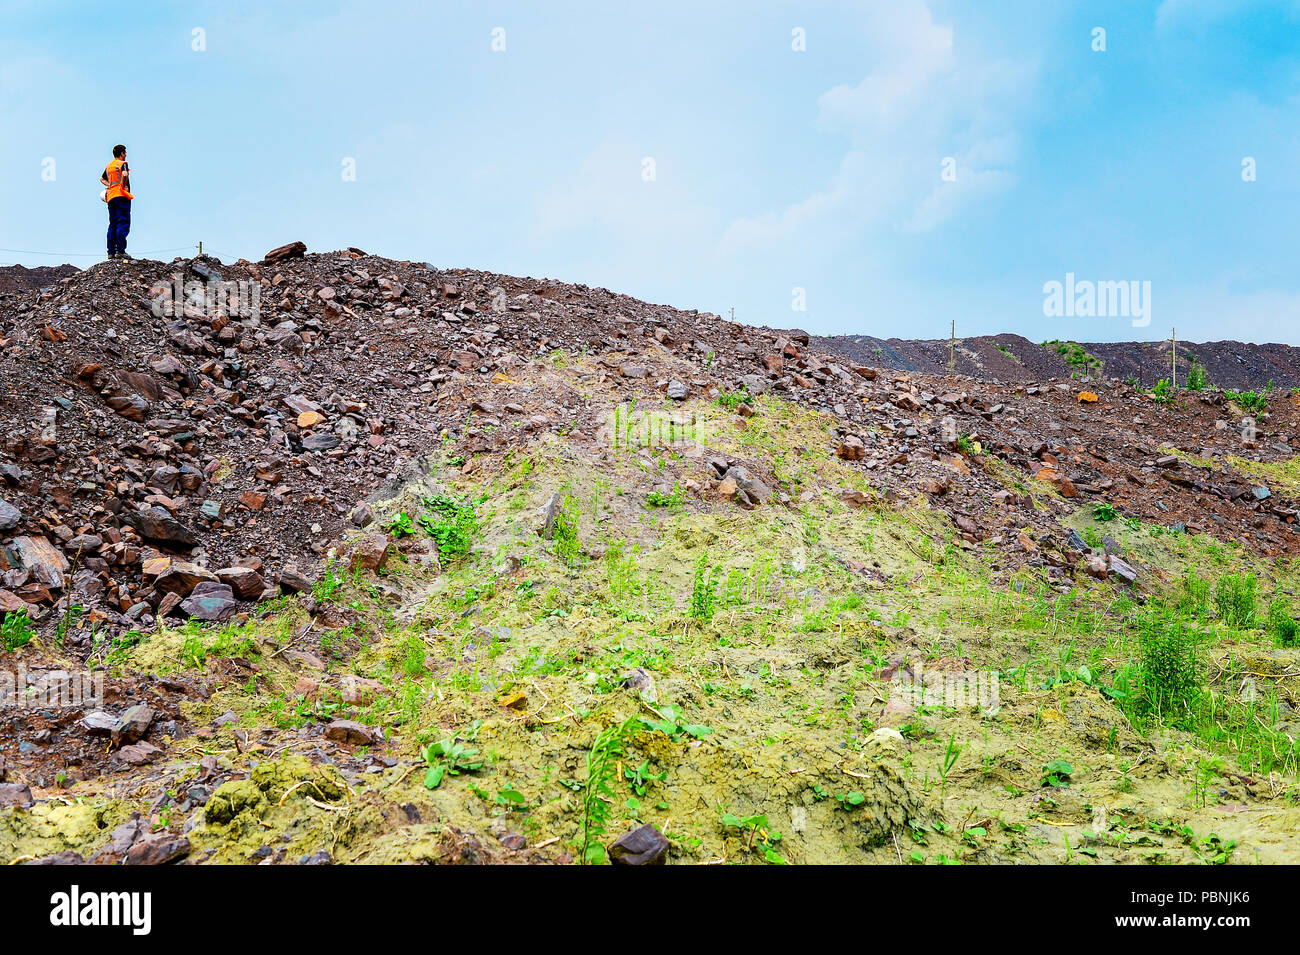 The worker is at the top of the rock heap in his quarry. Stock Photo